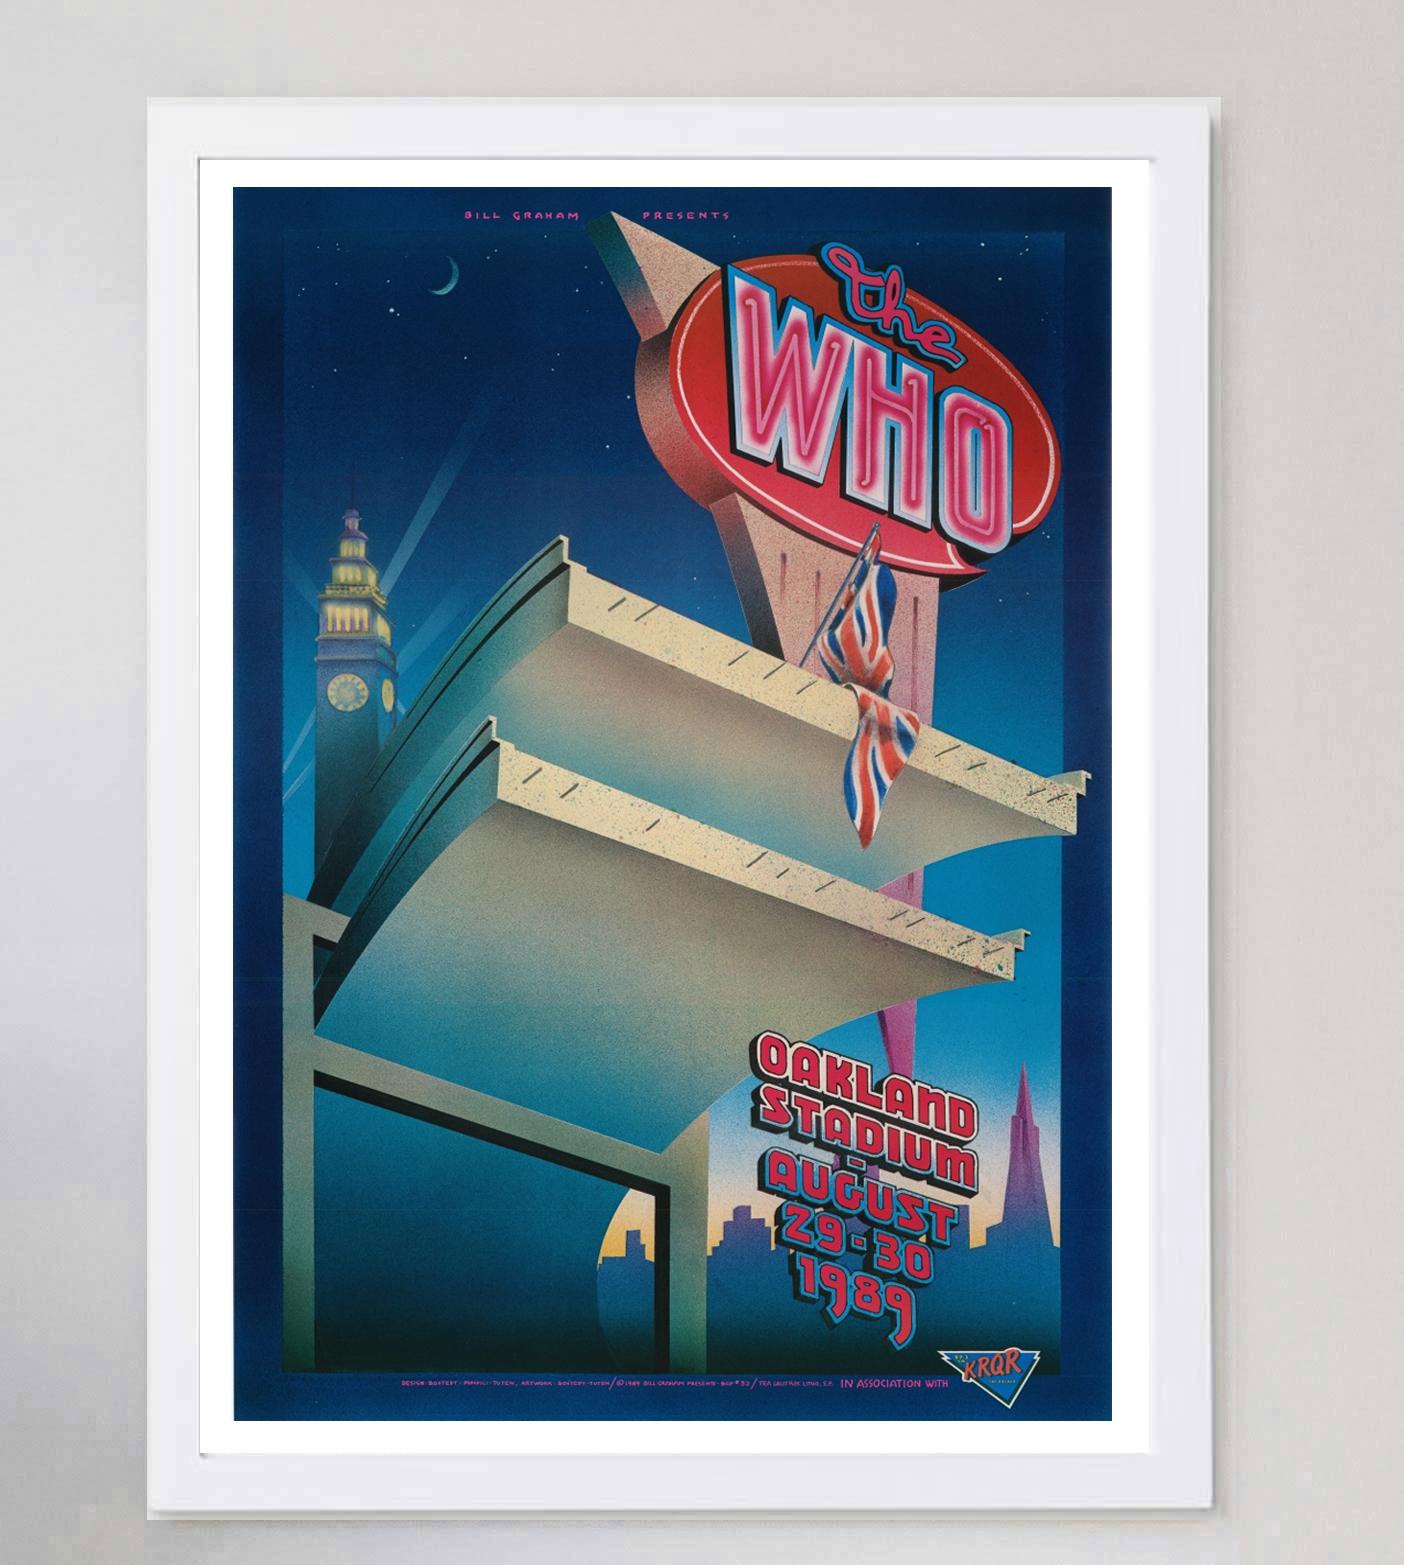 American 1989 The Who - Oakland Stadium Original Vintage Poster For Sale